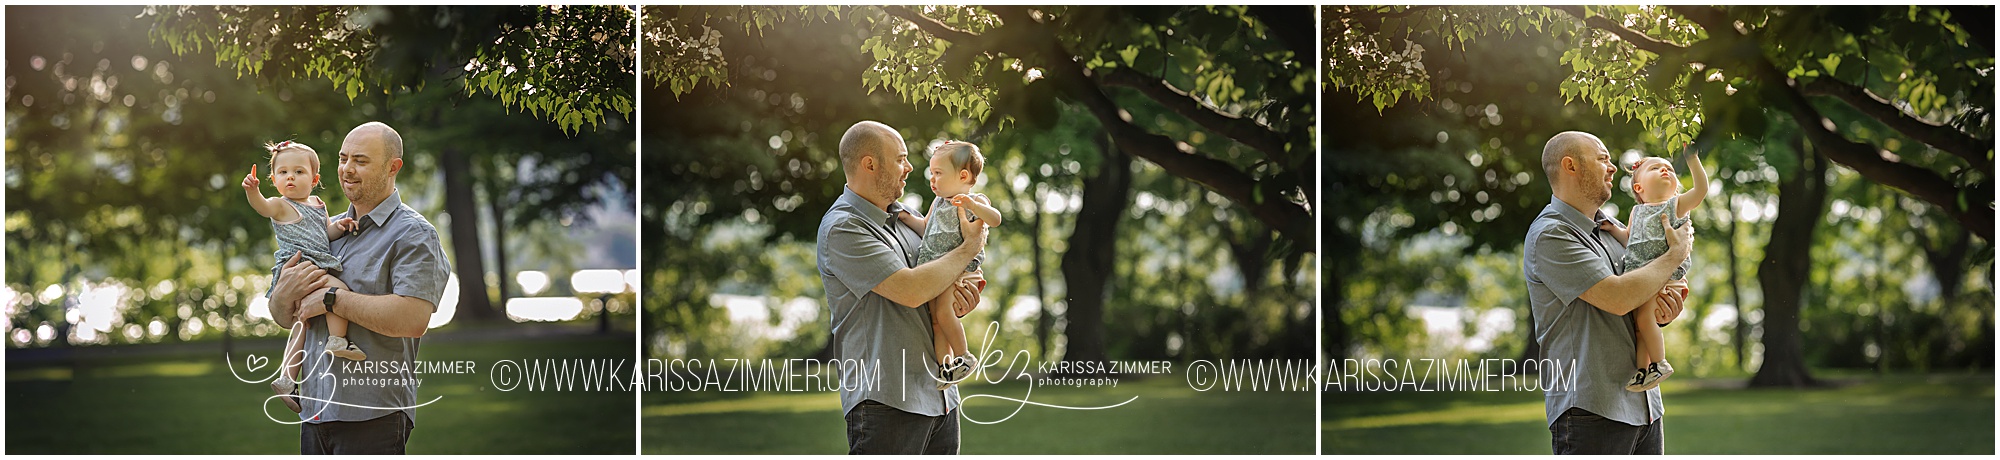 Harrisburg Outdoor Family Photography